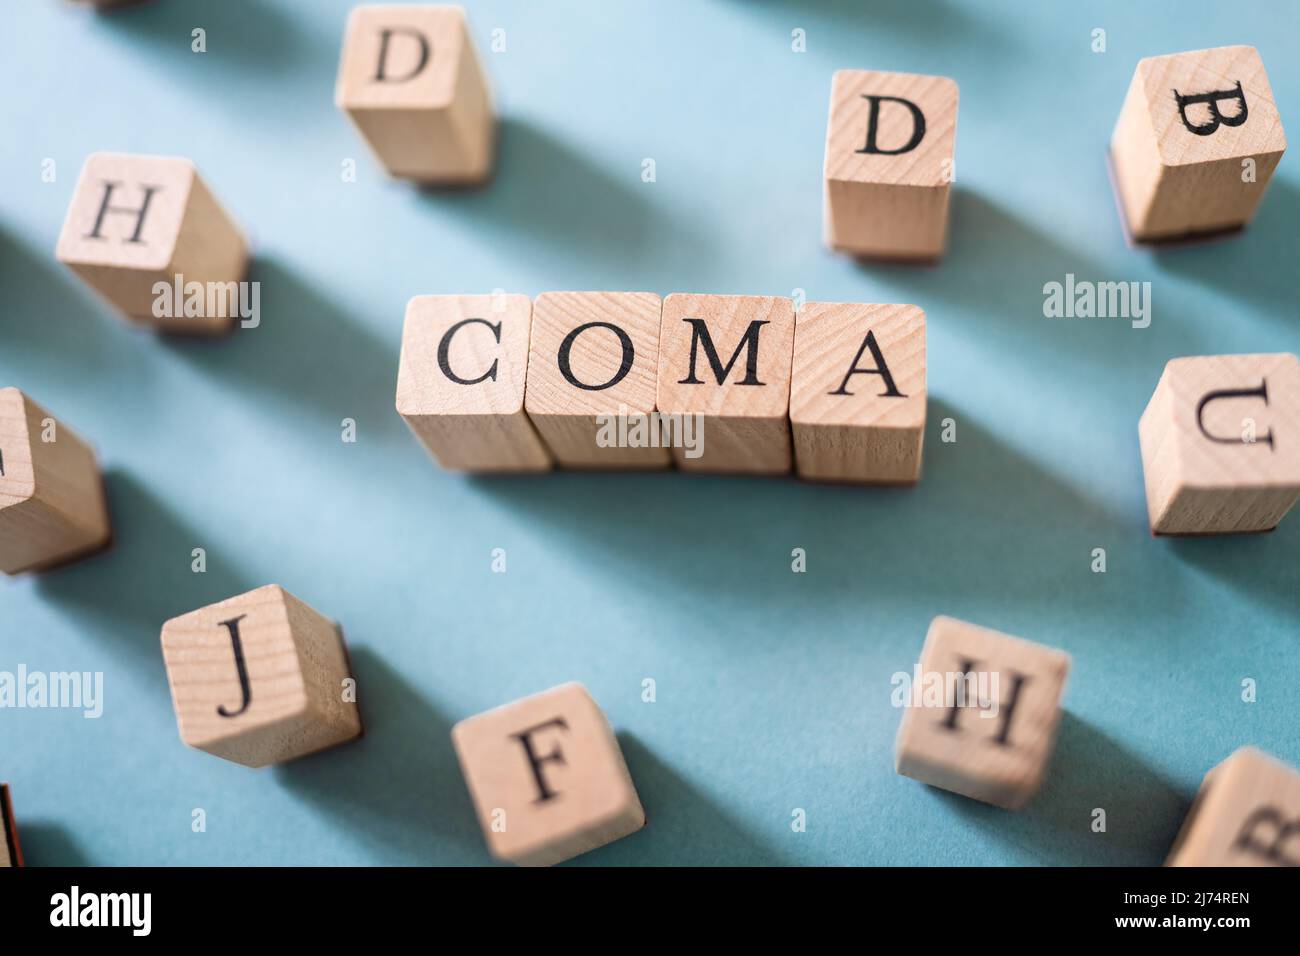 Patient Coma Therapy And Health Accident Concept Stock Photo